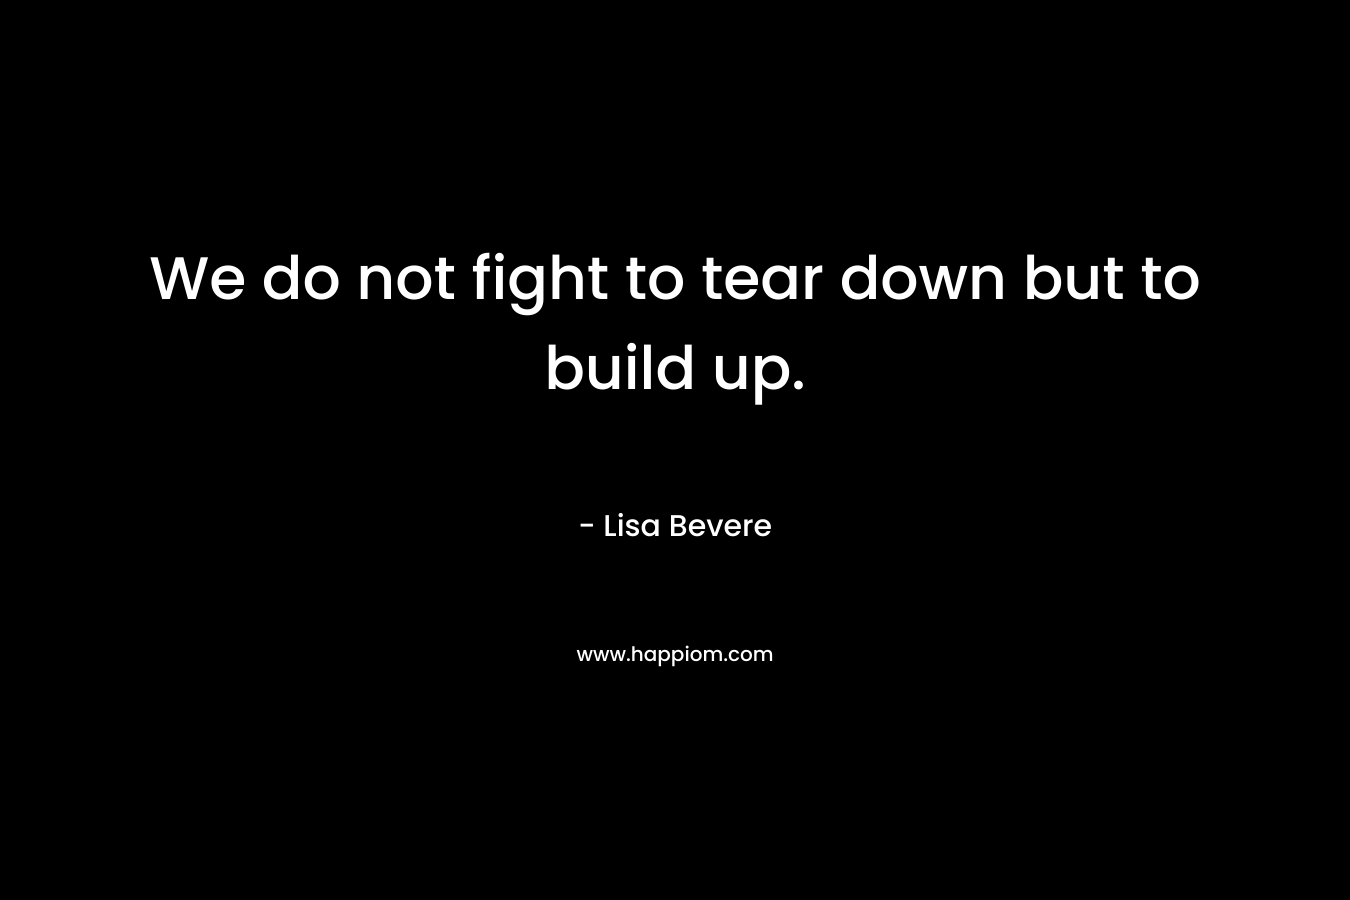 We do not fight to tear down but to build up. – Lisa Bevere